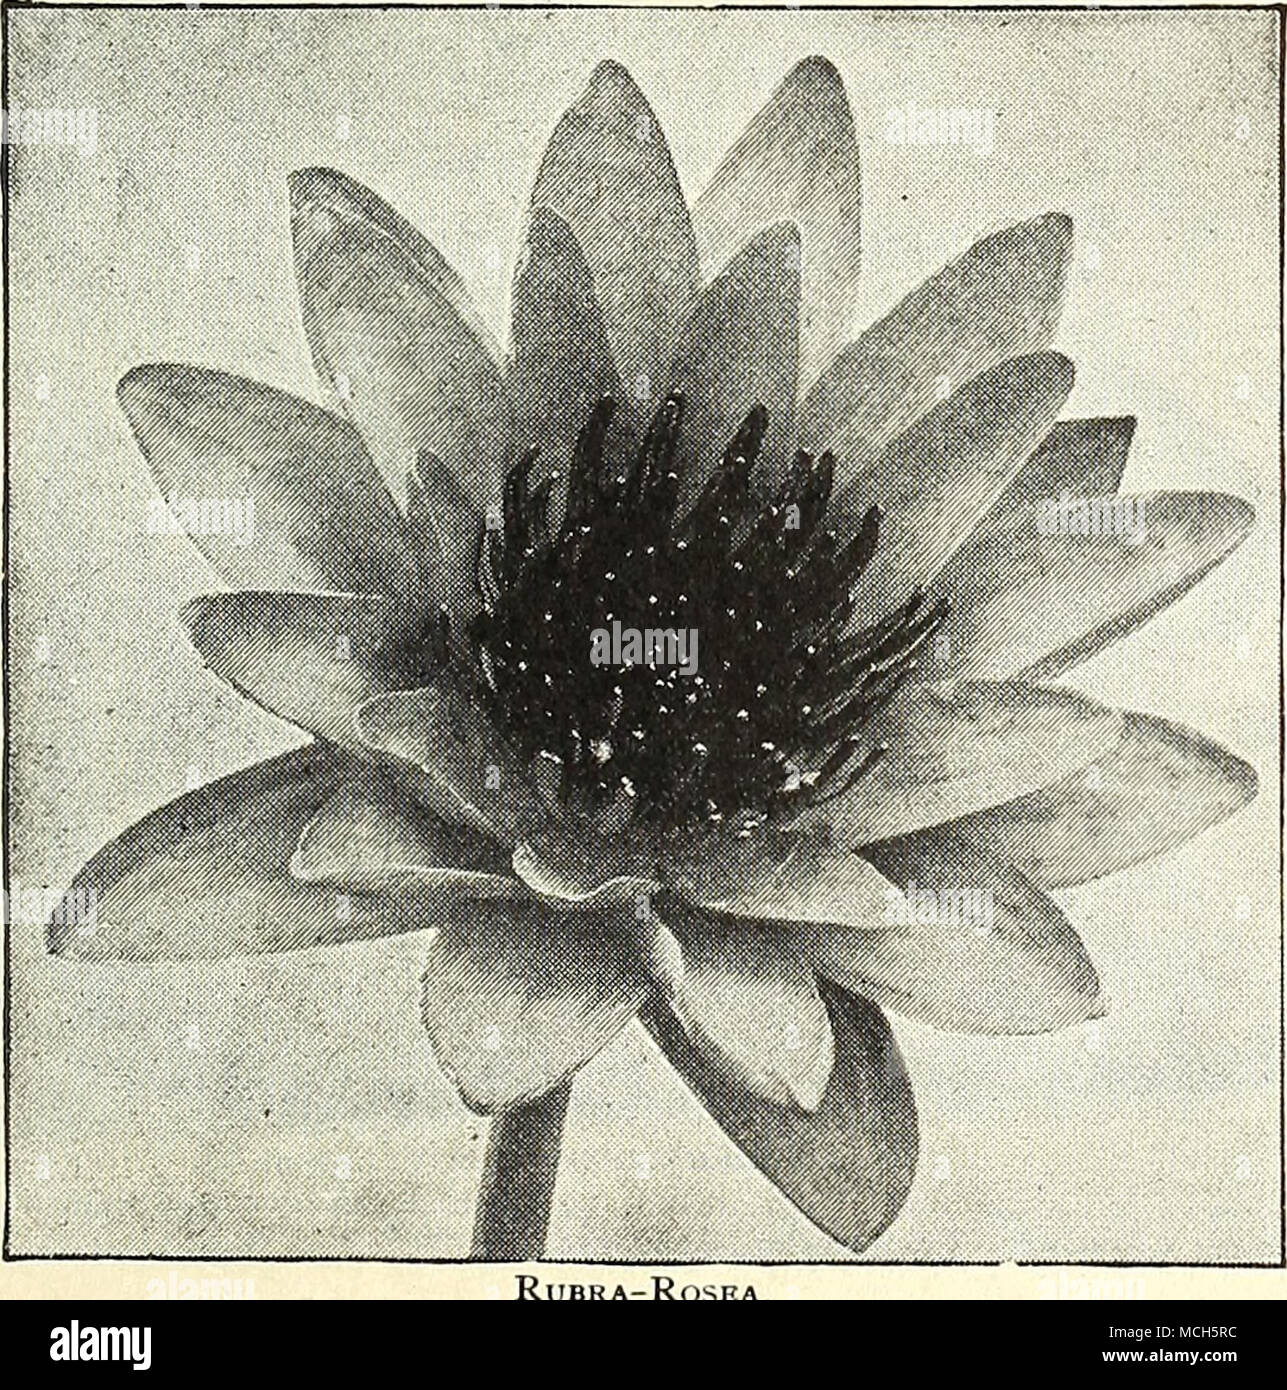 . Frank Tki^lfase. Frank Trelease. (Crim- son Devoniensis'). This supeib tender night- blooming Water Lily sur- passes all other red va- rieties by the brilliancy and depth of the rich, glowing dark crimson of its flowers, which are identical in form to N. Devoniensis, 9 to 10 inches in diameter; slam- ens reddish-bronze, crim- son at the base; foliage 15 inches across, den- tated, of a glossy dark bronzy-red, resembling in color the foliage of Black Beauty Canna. $250 each. Lotus (A^. tlieniinlis, D. C). The White Lotus, leaves dark, glossy green, 12 to 20 inches in diameter. Flowers white, t Stock Photo